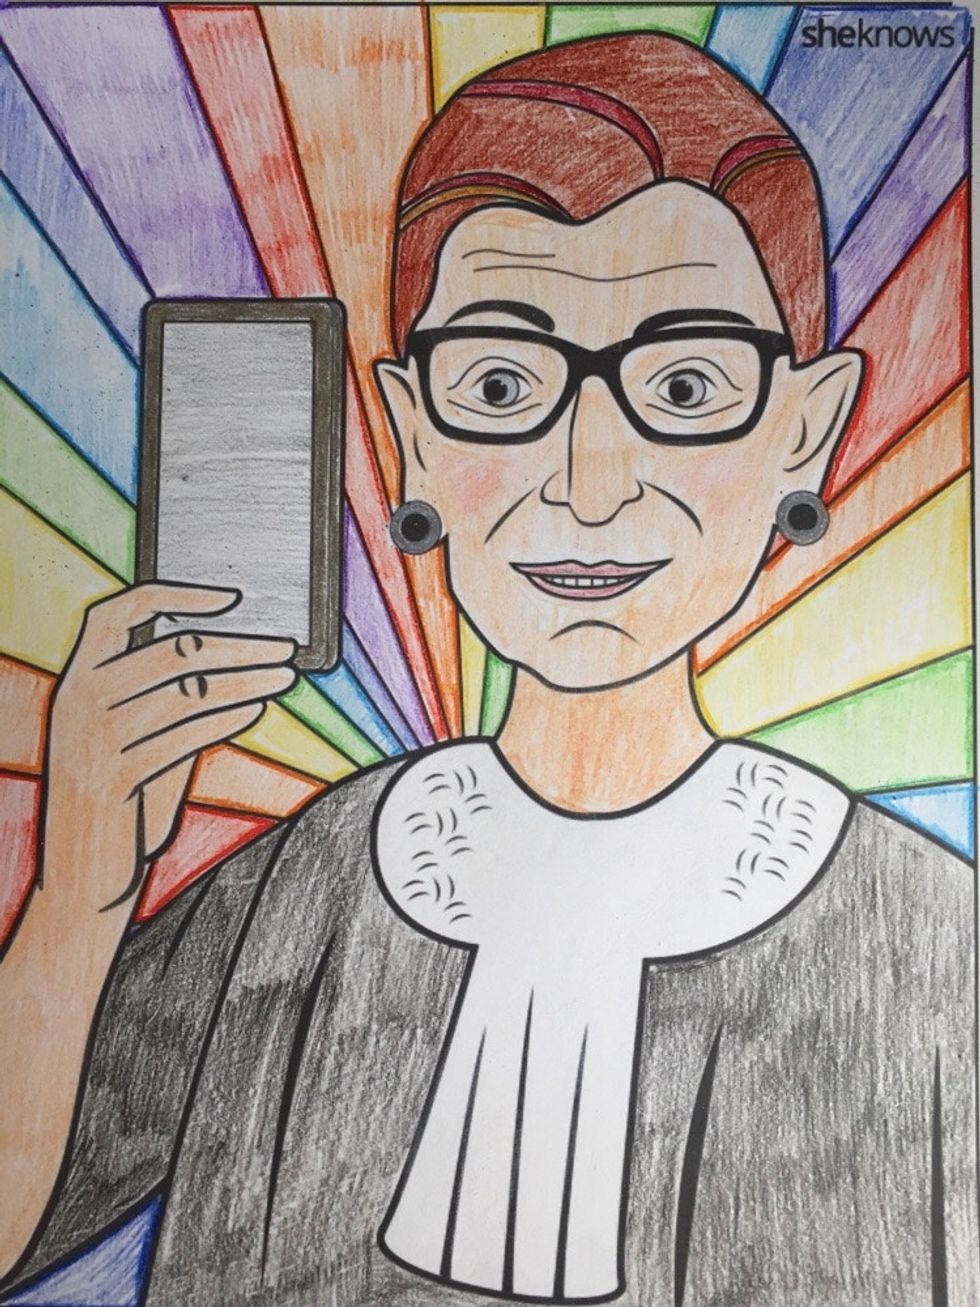 There S A Ruth Bader Ginsburg Coloring Book For Those Who Want To Color